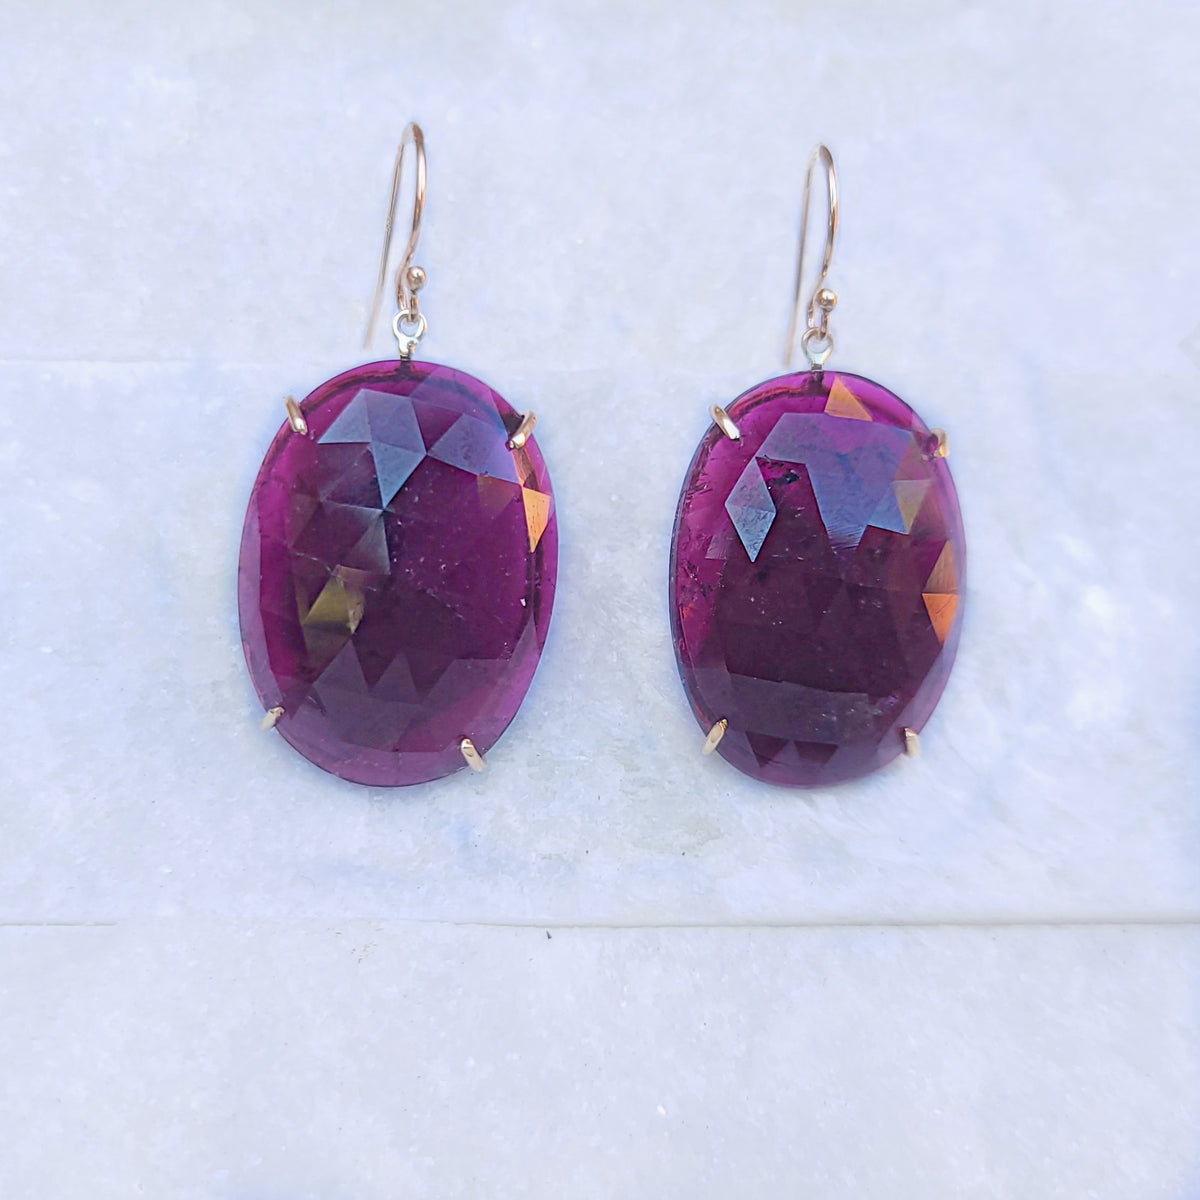 Sincerely Ginger Jewelry 14L Large Rose Cut Tourmaline Earrings in Yellow Gold